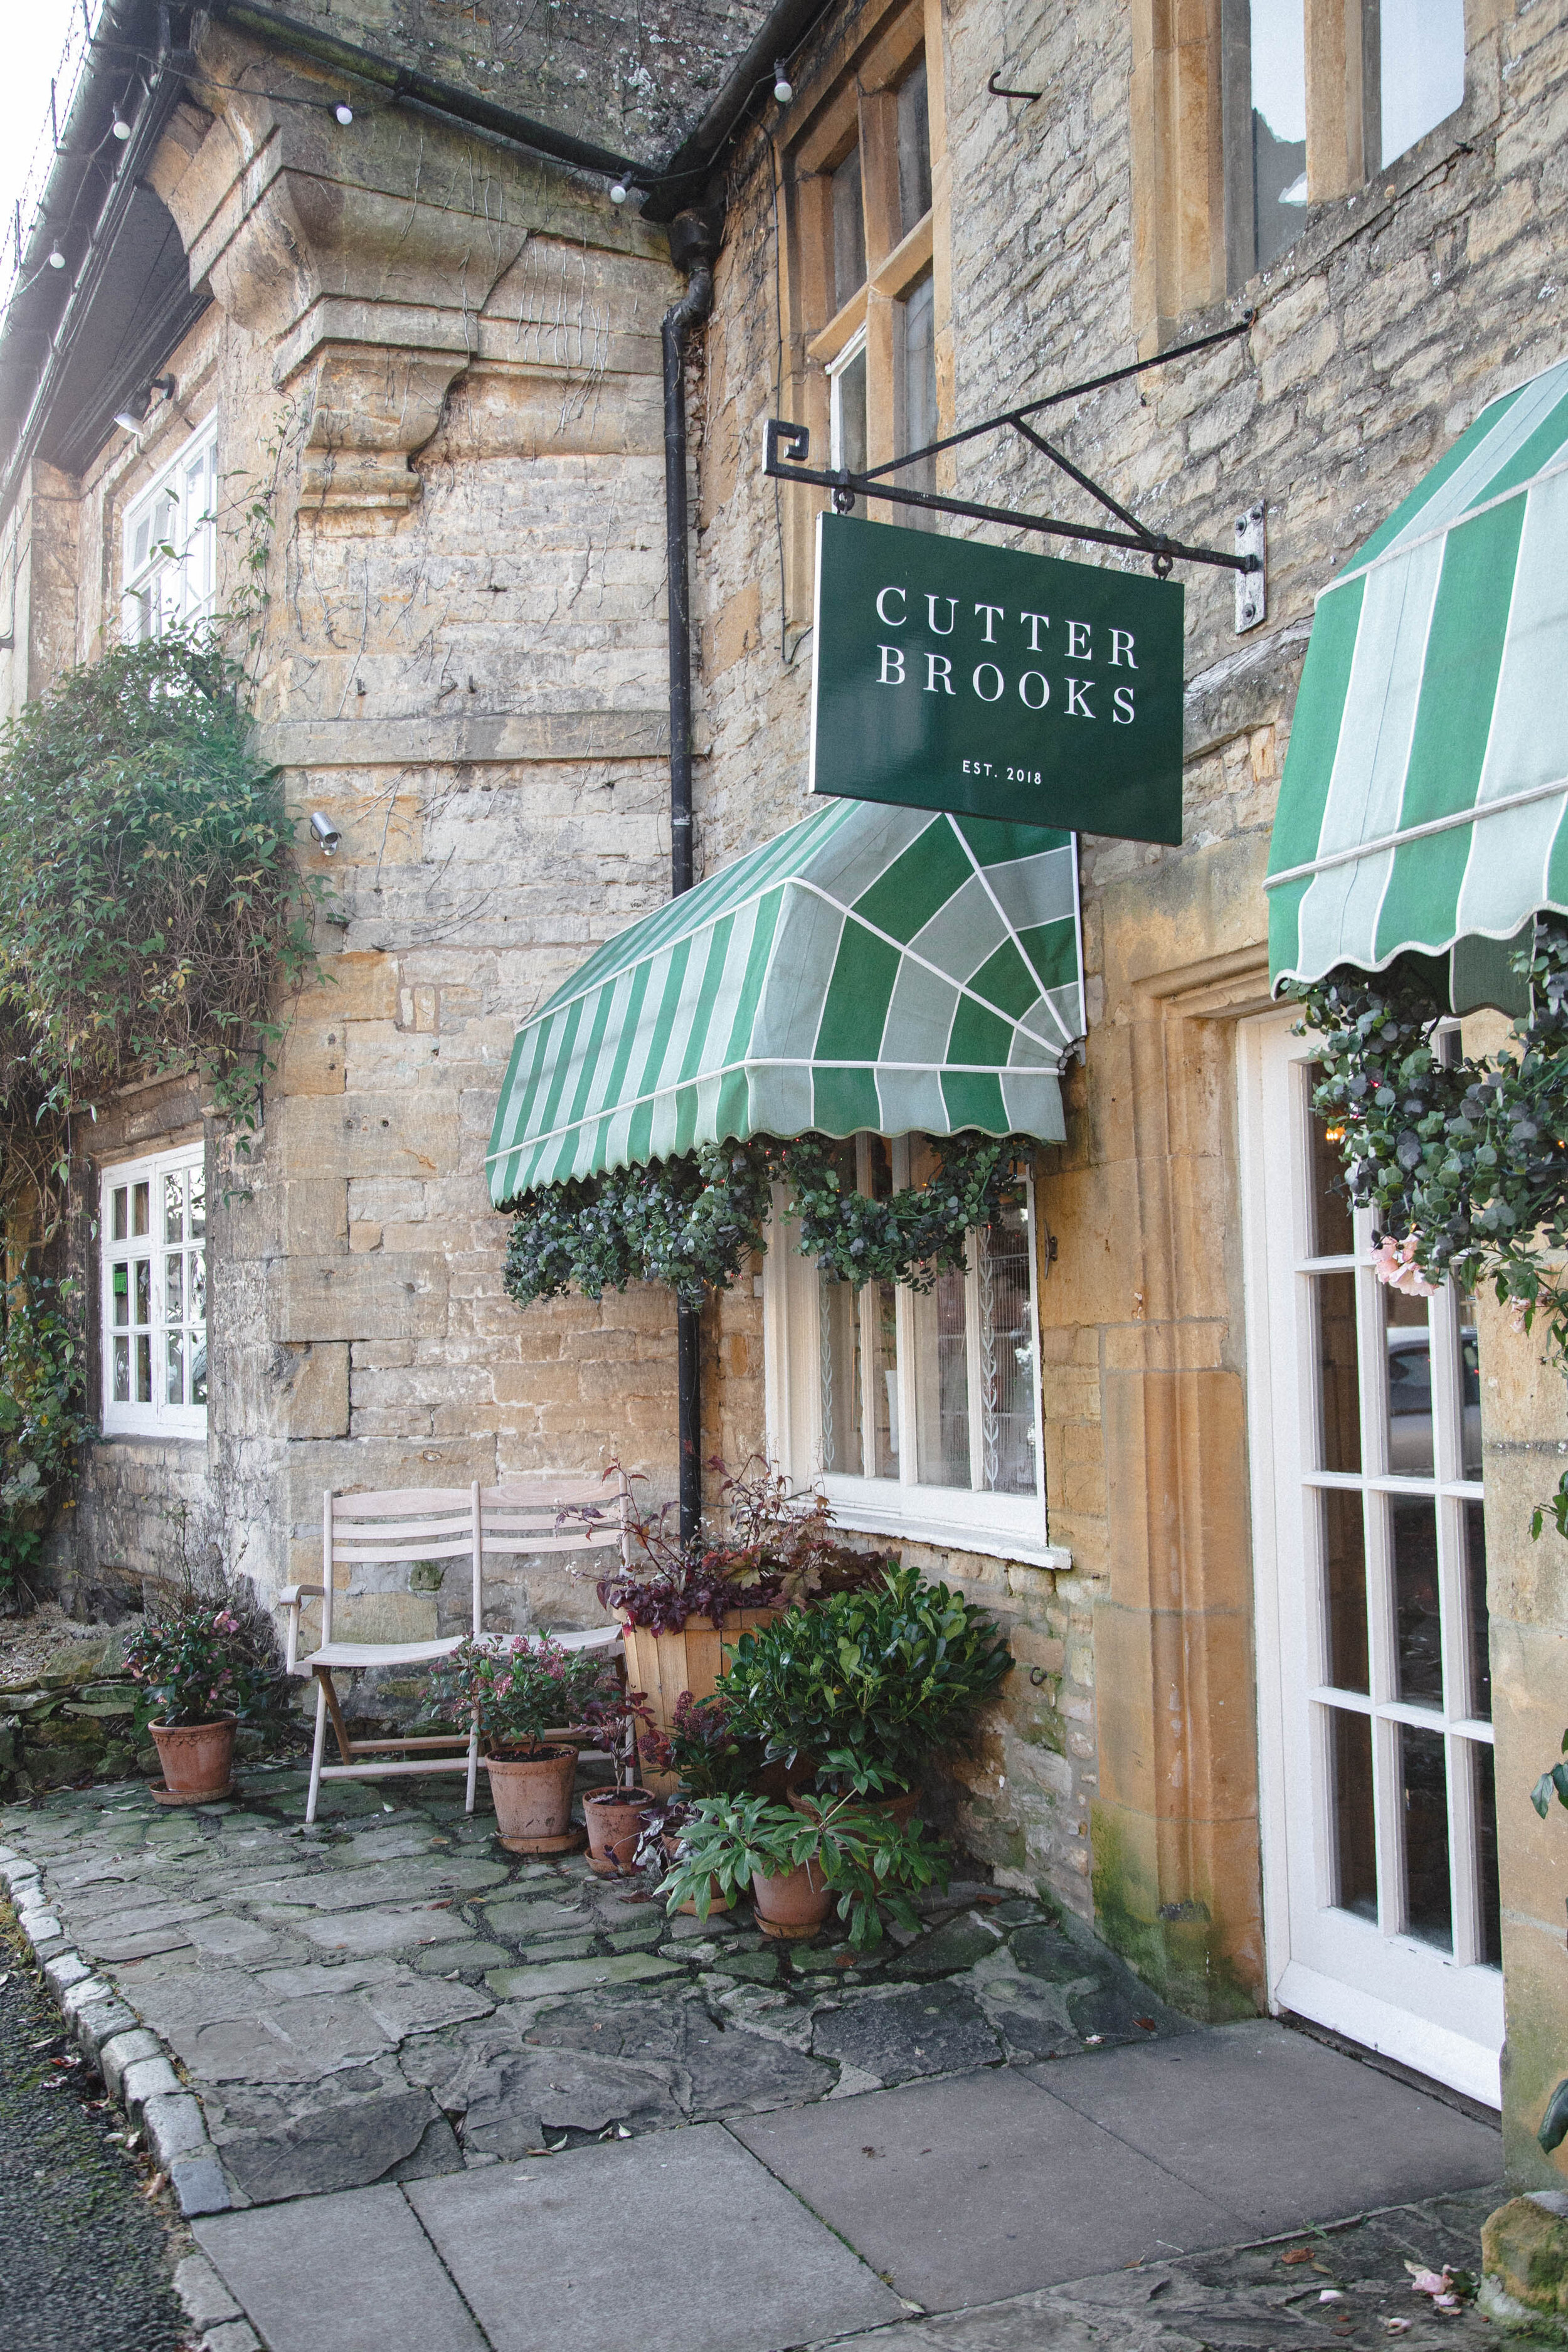 Cutter Brooks, Stow-on-the-Wold, England